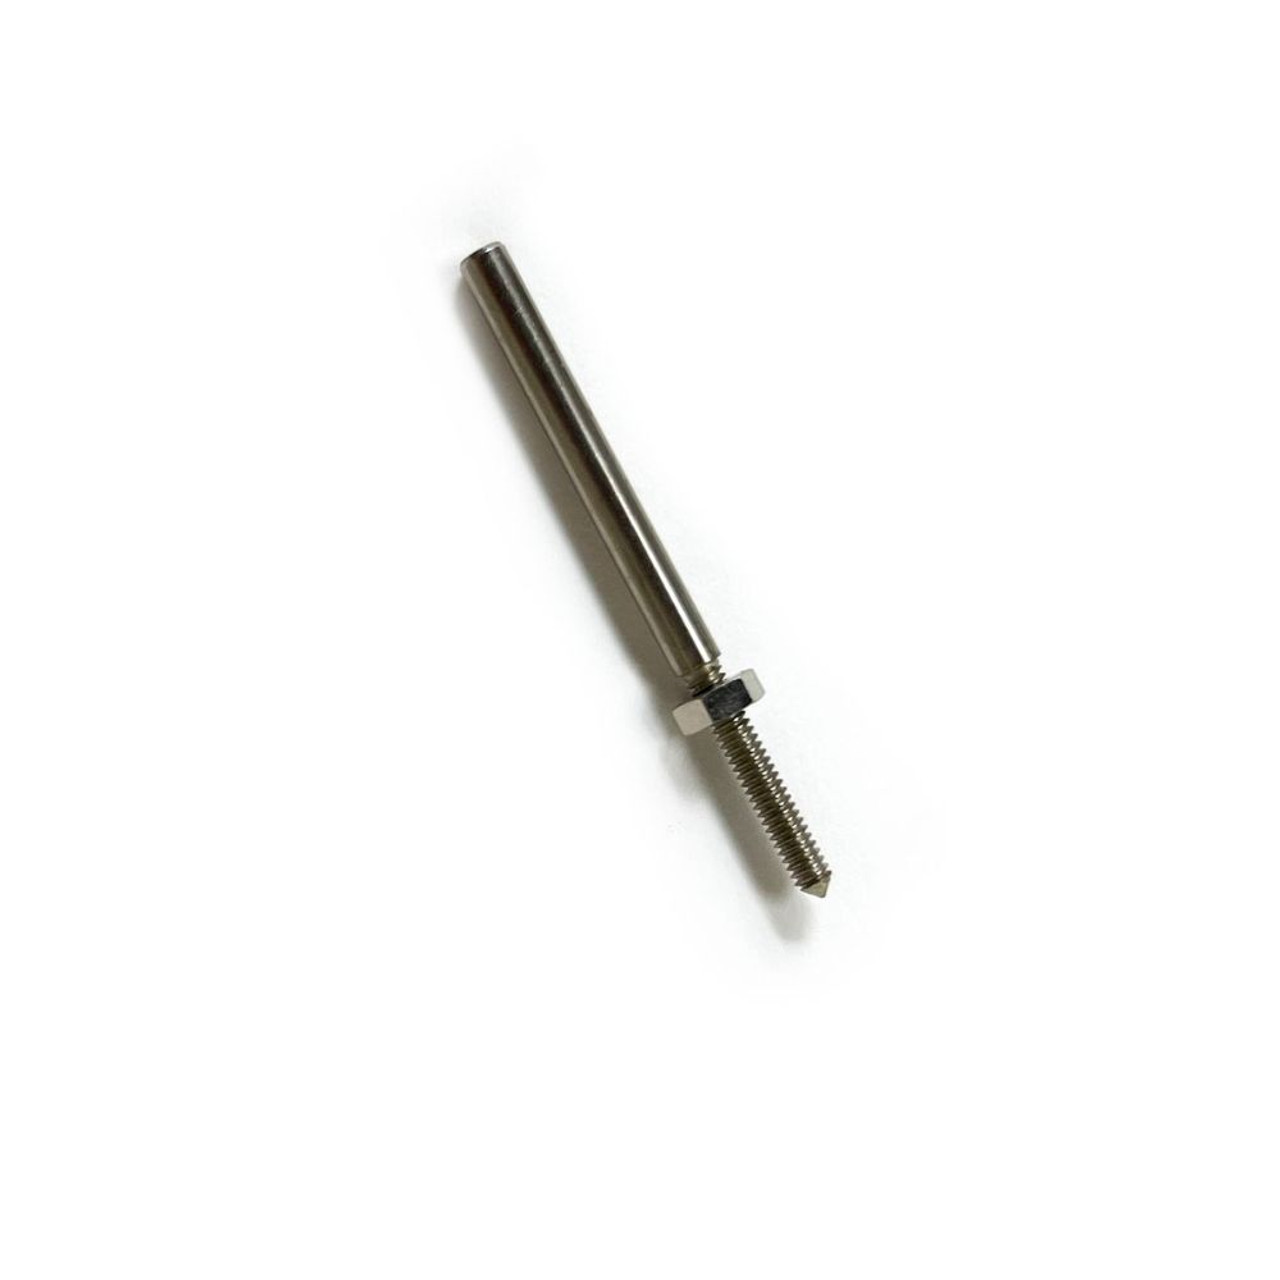 Foredom A-M3 Tapered Mandrel Shank - 2.35mm (3/32") 106-A-M3